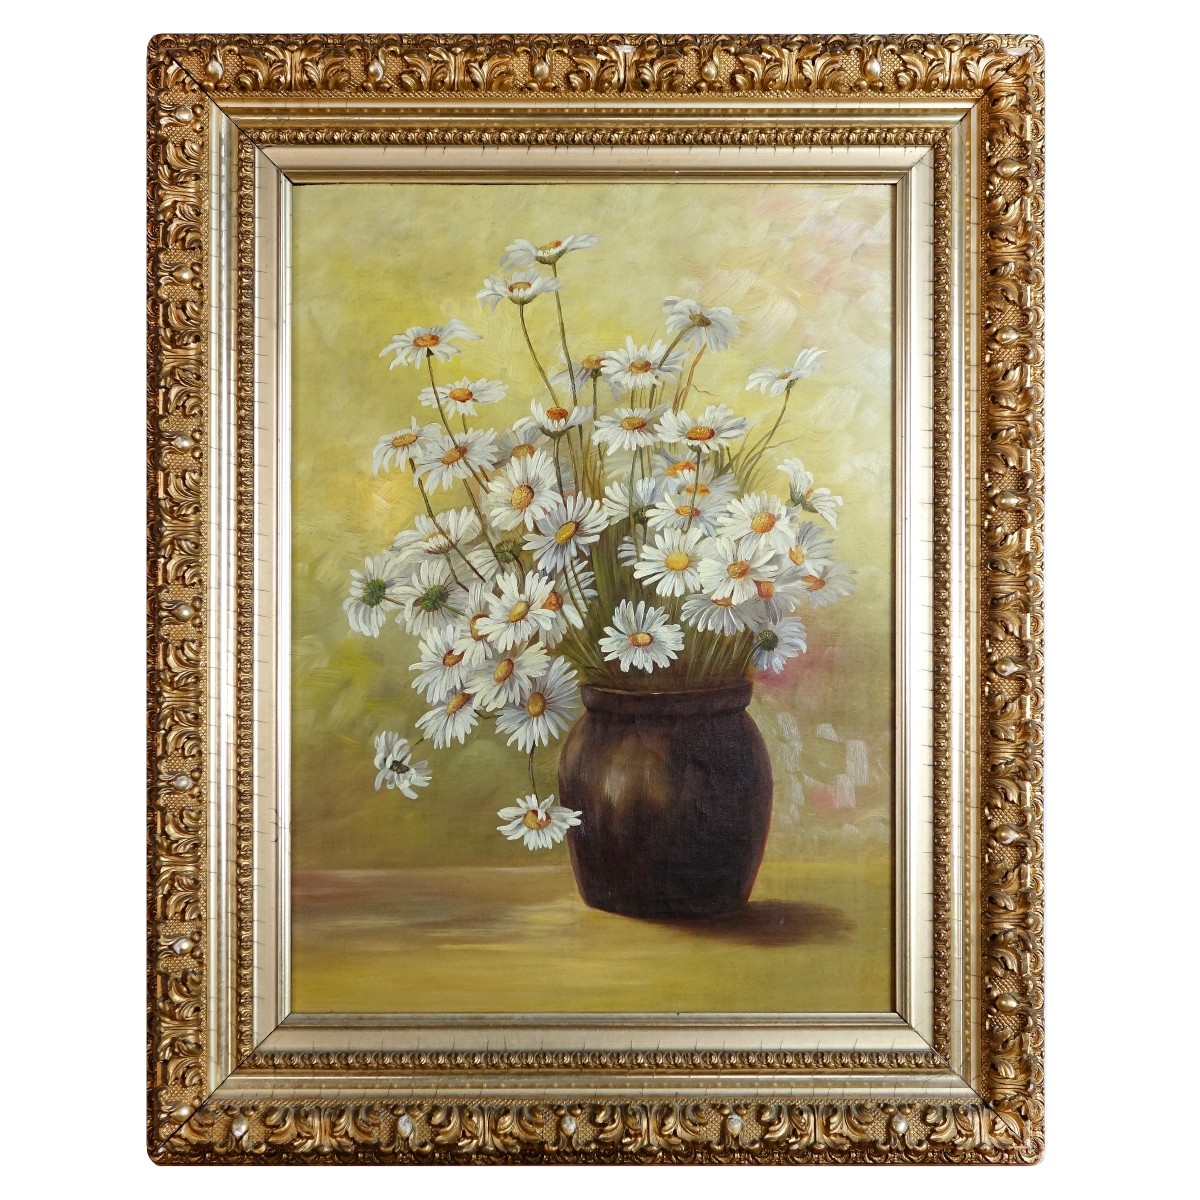 Antique Oil on Canvas "Still Life Daisies"